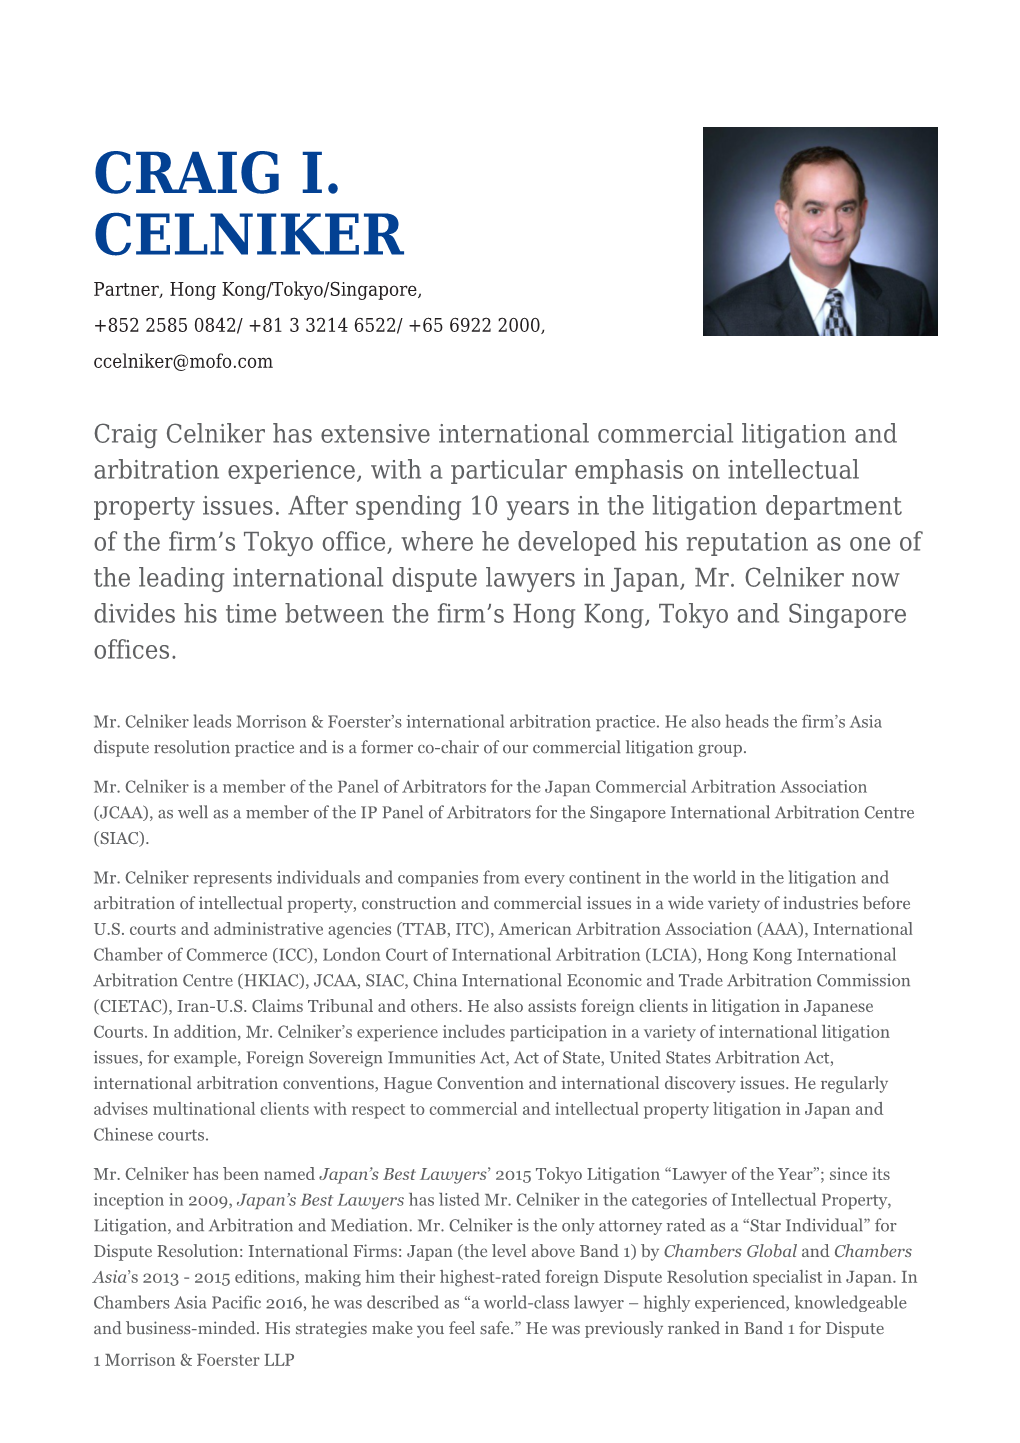 Craig Celniker Has Extensive International Commercial Litigation and Arbitration Experience